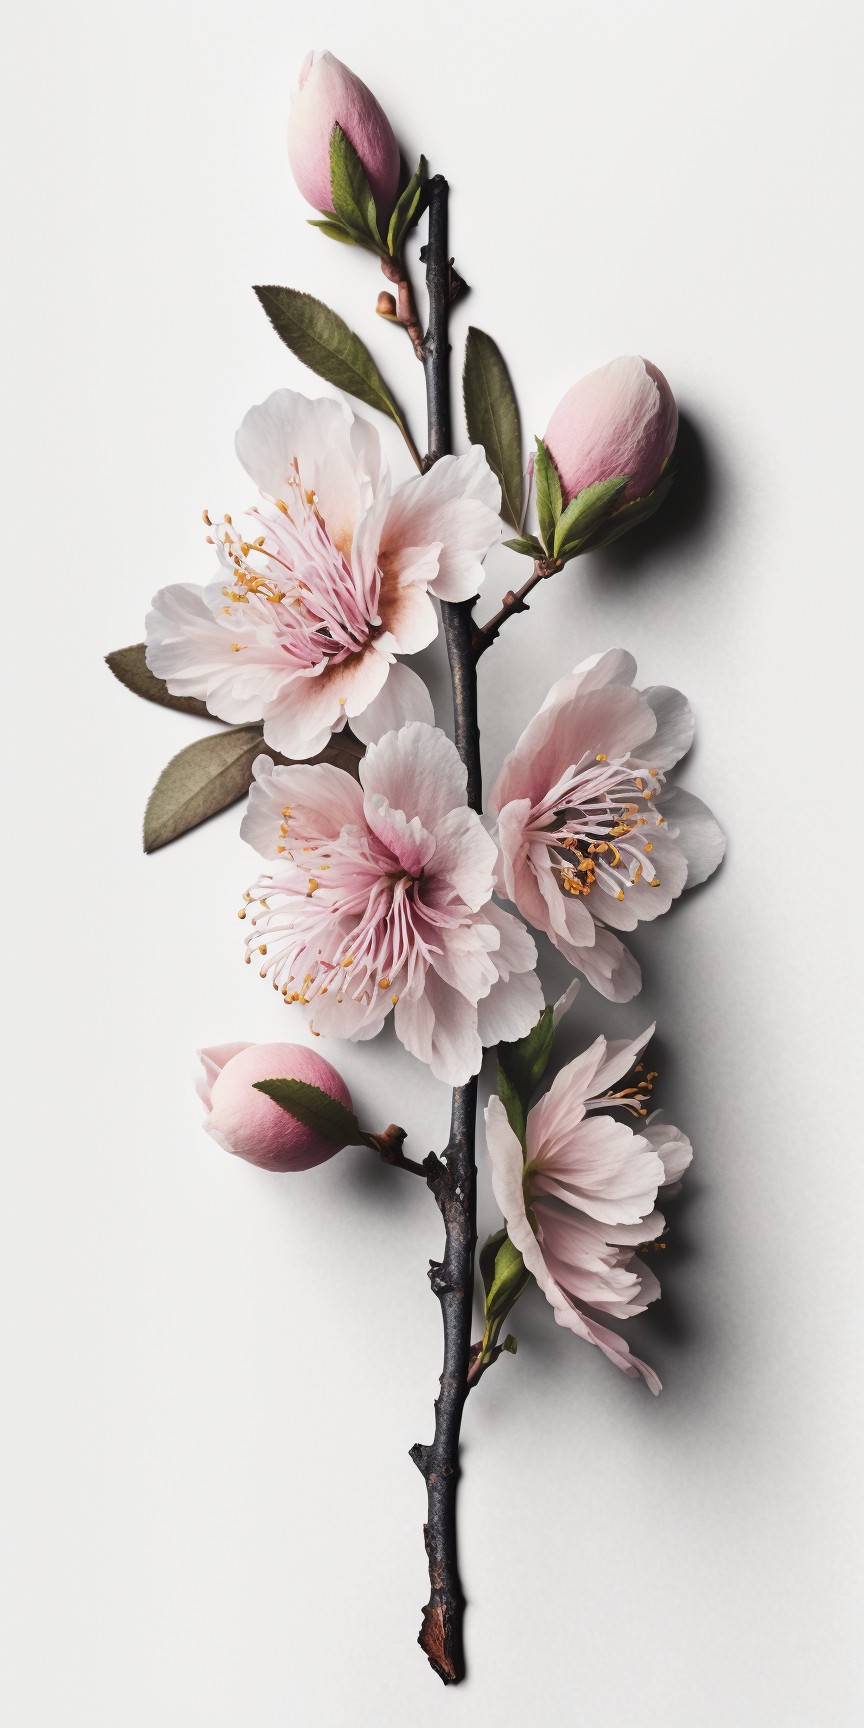 Blooming Peach Blossom of Super Tidying